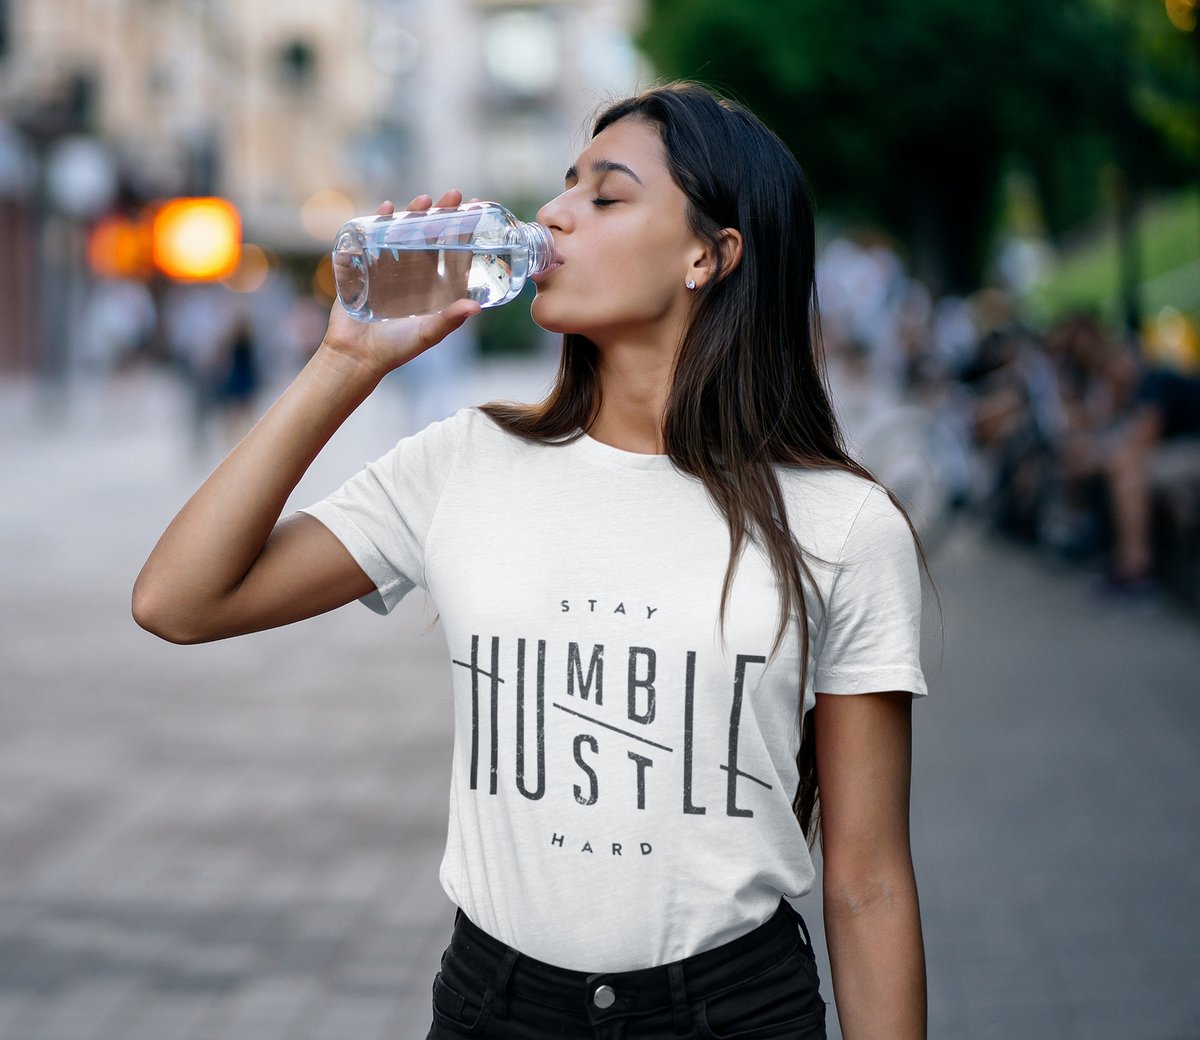 Wear your mantra. Stay humble, hustle hard. 🌟Buy Yours ✅ pasosdeals.com/tshirt

#GraphicTee #FashionForward #StyleEssentials #HustleHard #TeeLove #OOTD #humble #hustlers #workmode #startups #founder #forbes #wsj